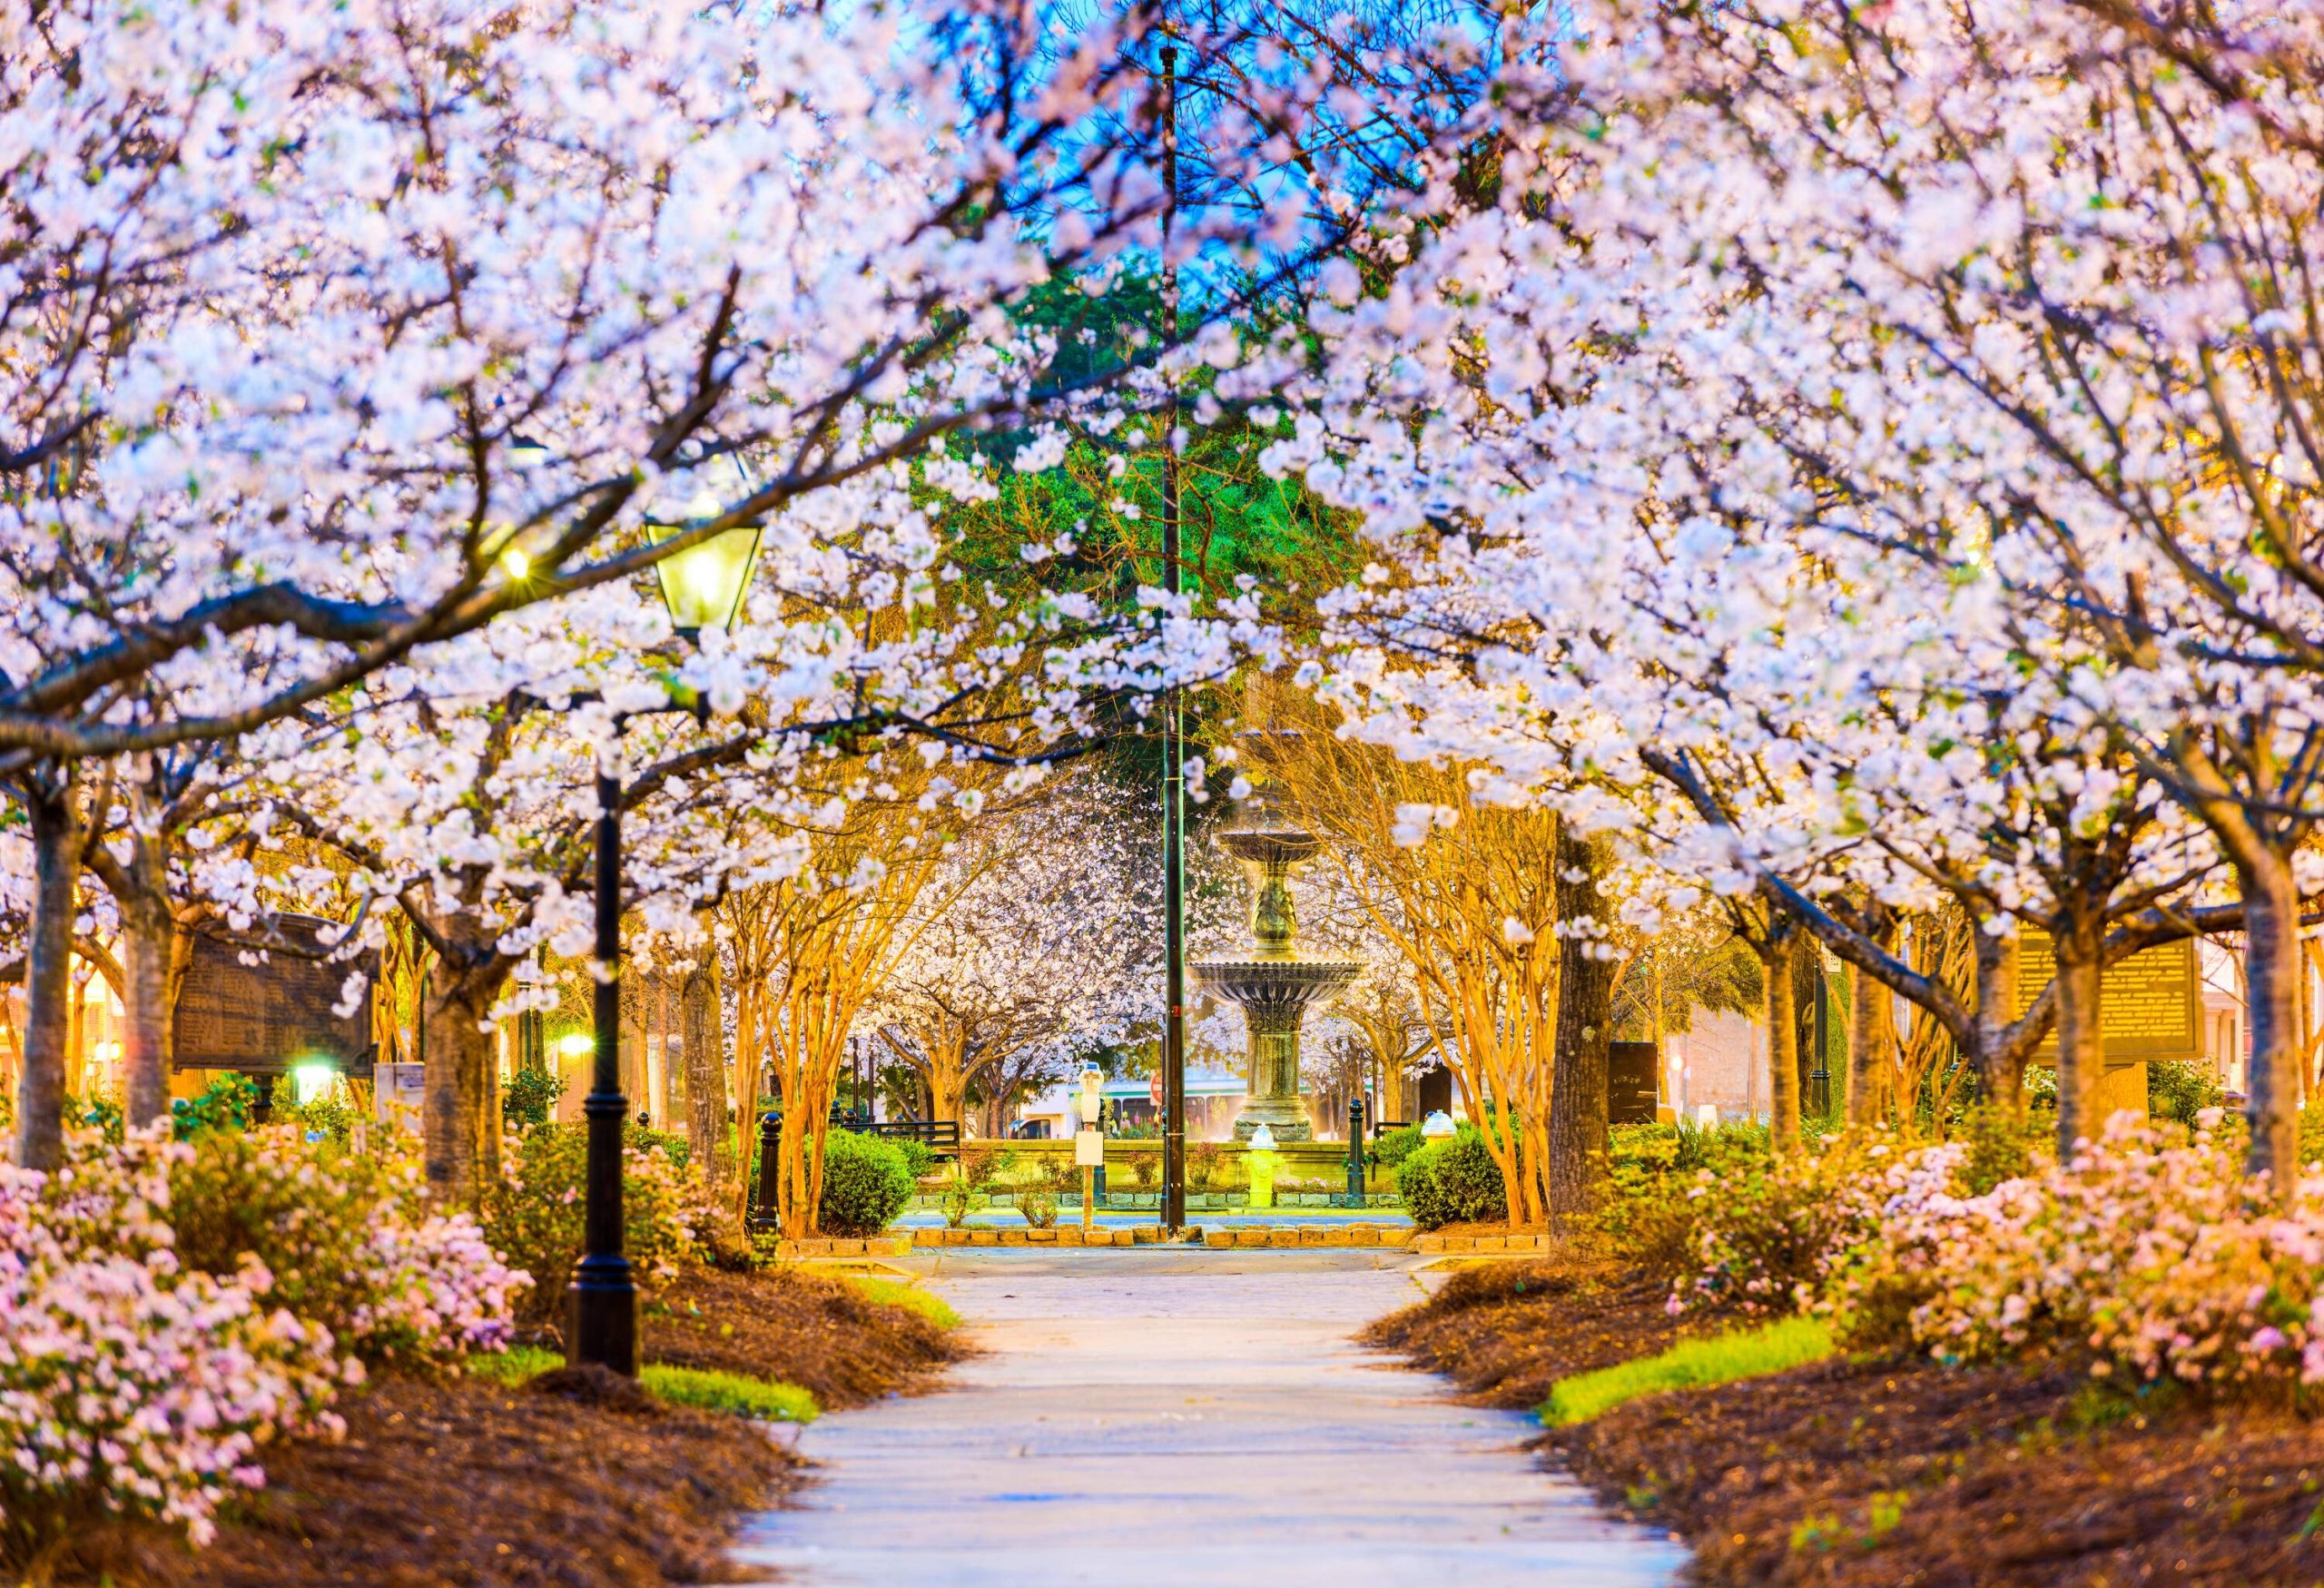 A picturesque and brightly lit footpath under the exquisite beauty of blooming cherry blossoms.